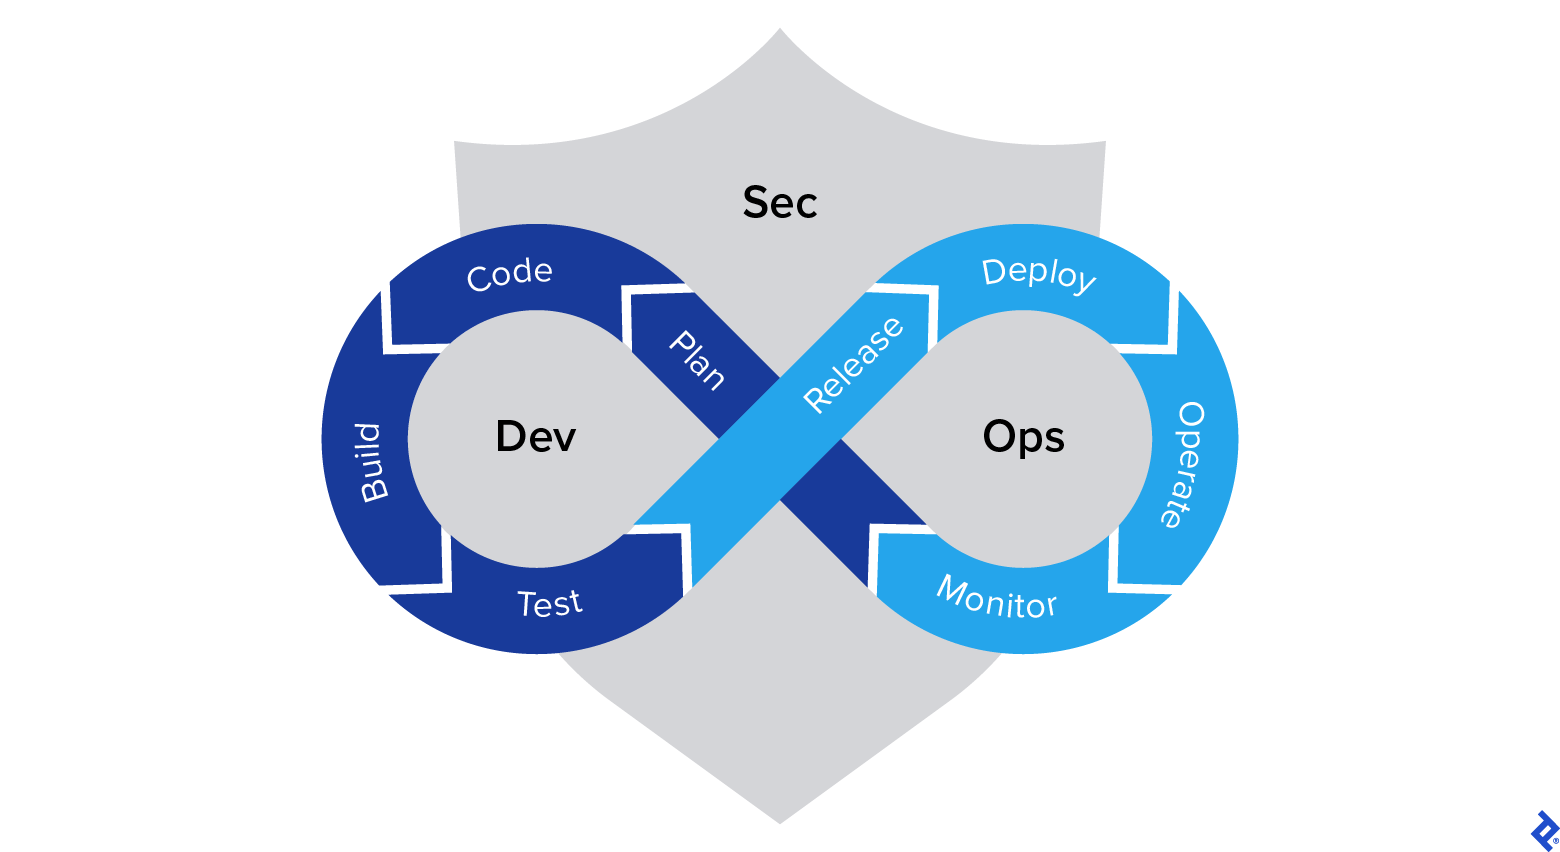 A shield representing security behind an infinity sign with development processes on one loop and operations processes on the other, illustrating how the three fields of DevSecOps are interconnected.